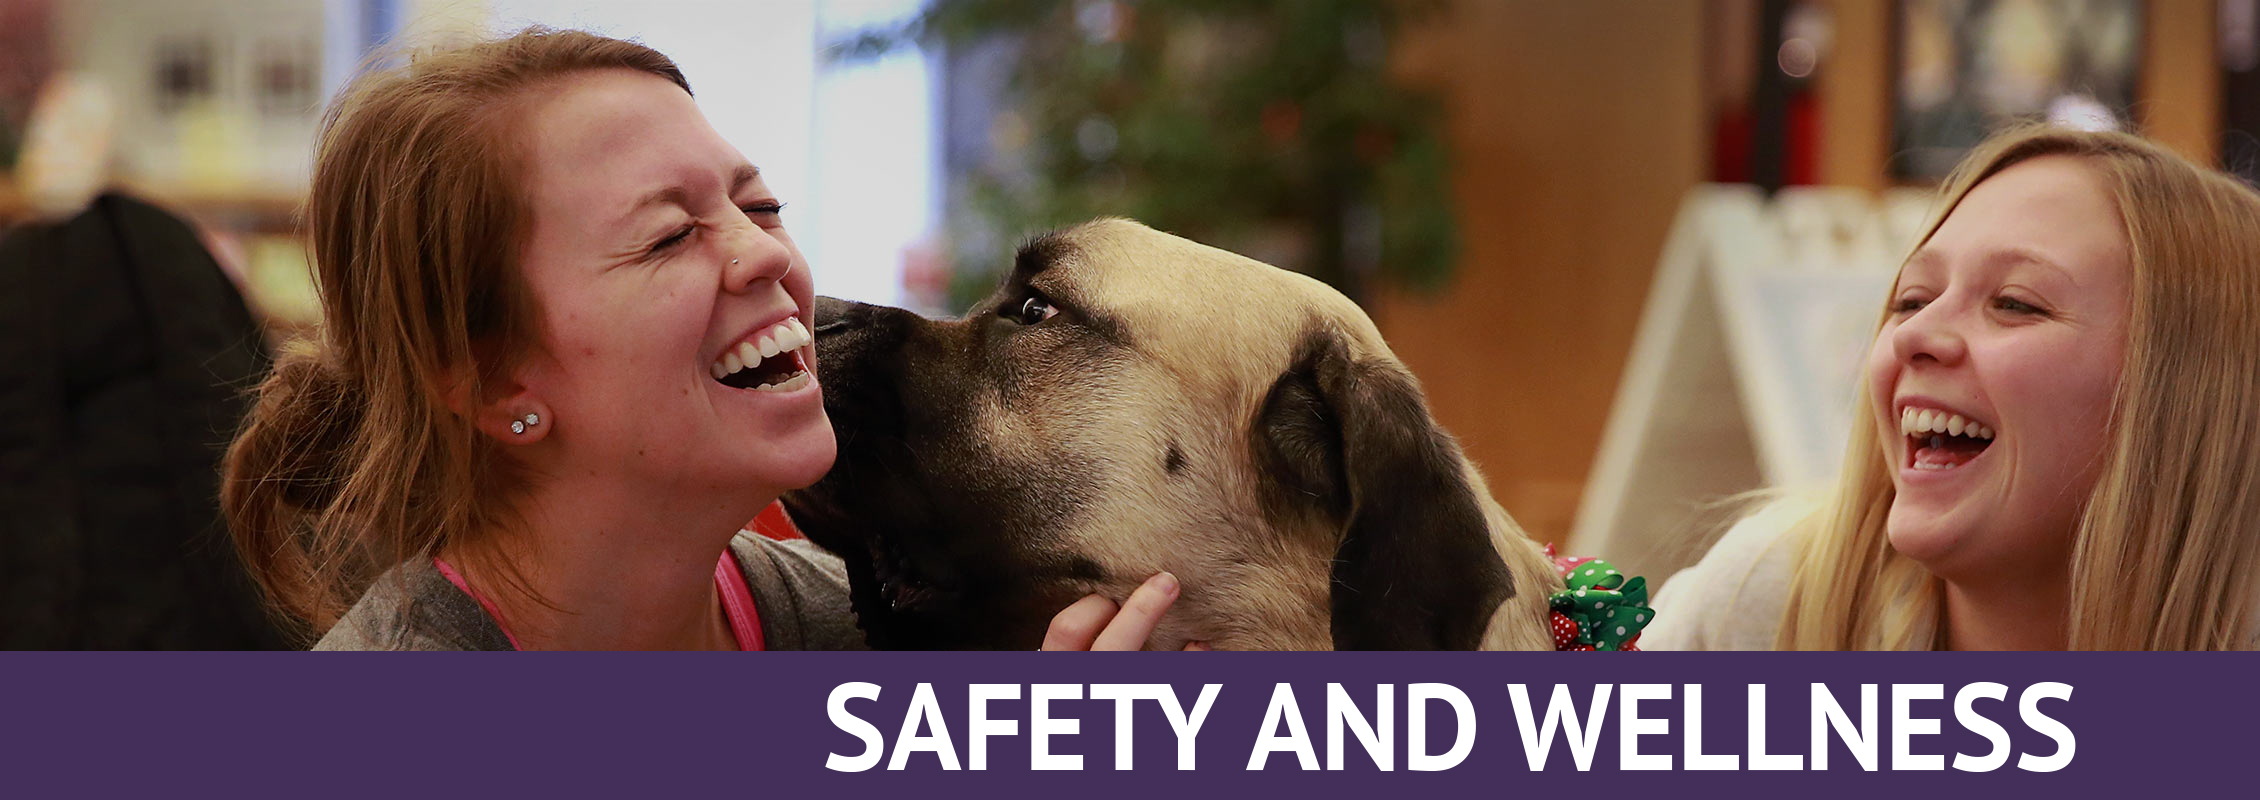 Safety and Wellness: Two students laughing as they pet a dog